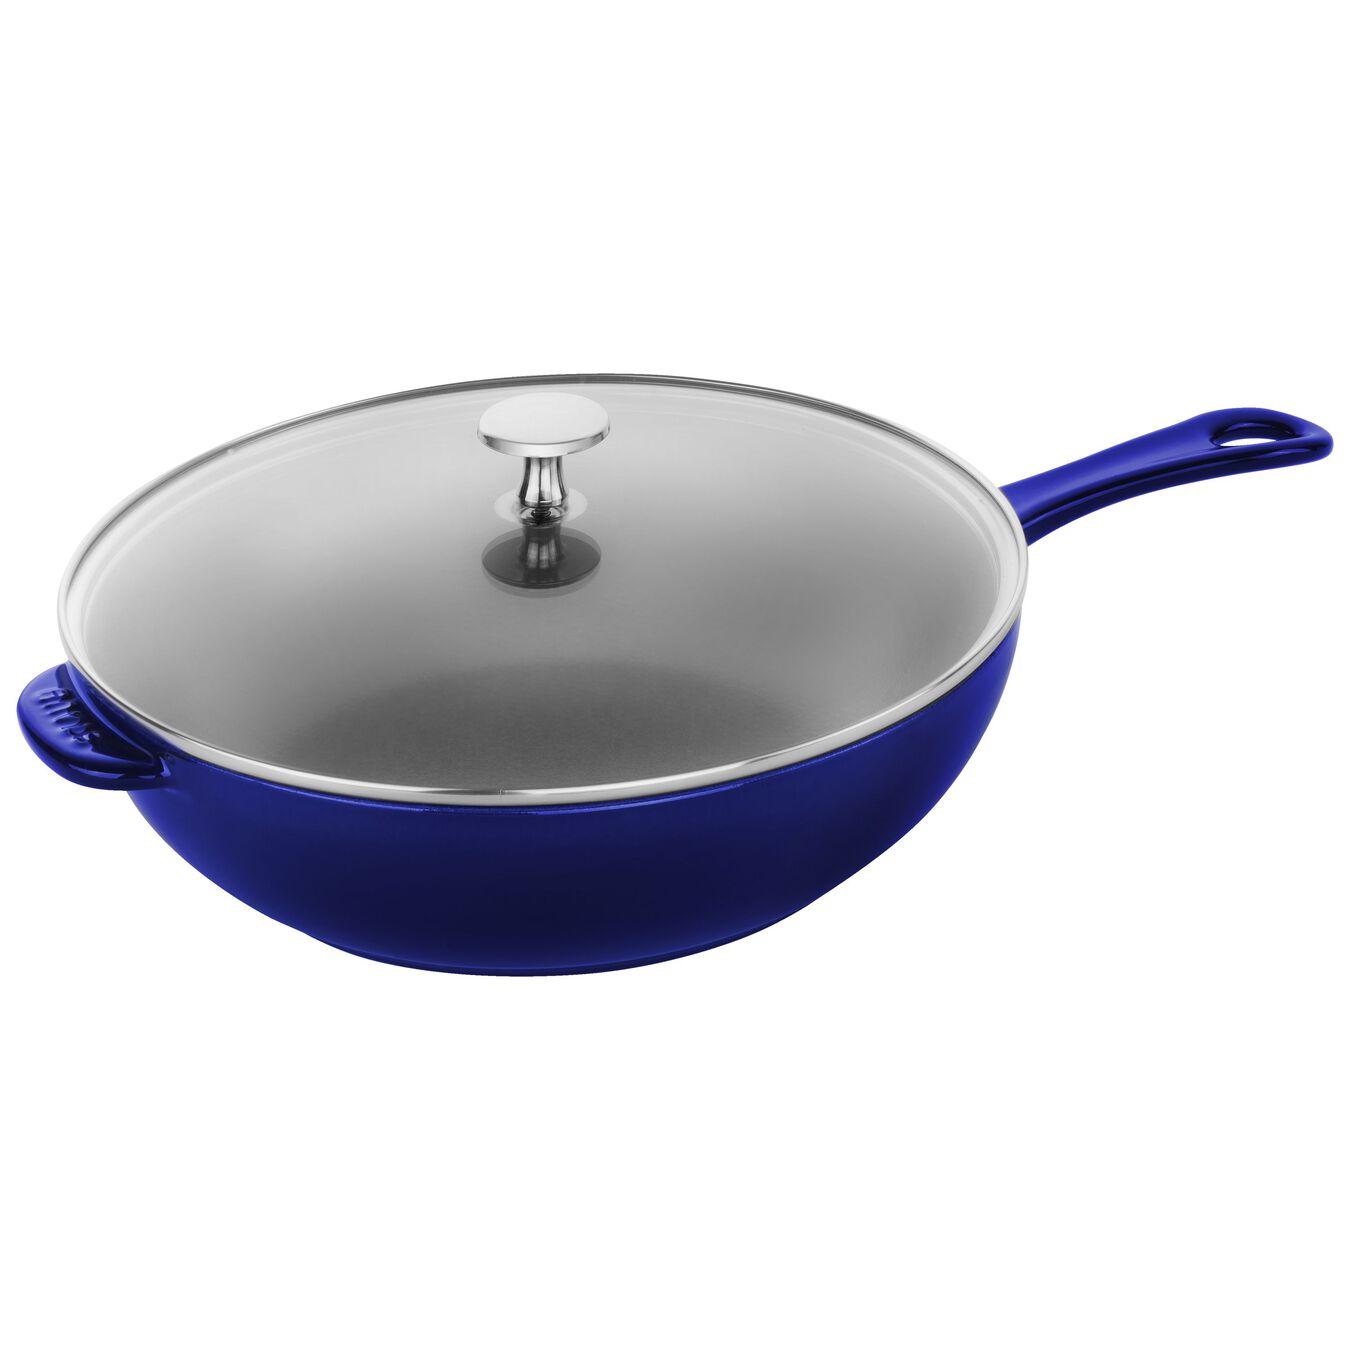 https://www.zwilling.com/on/demandware.static/-/Sites-zwilling-us-Library/default/dw172f187c/images/product-content/product-specific-images/staub-pdp-hotspot-modules/1010647_7-staub-daily-hotspot.jpg